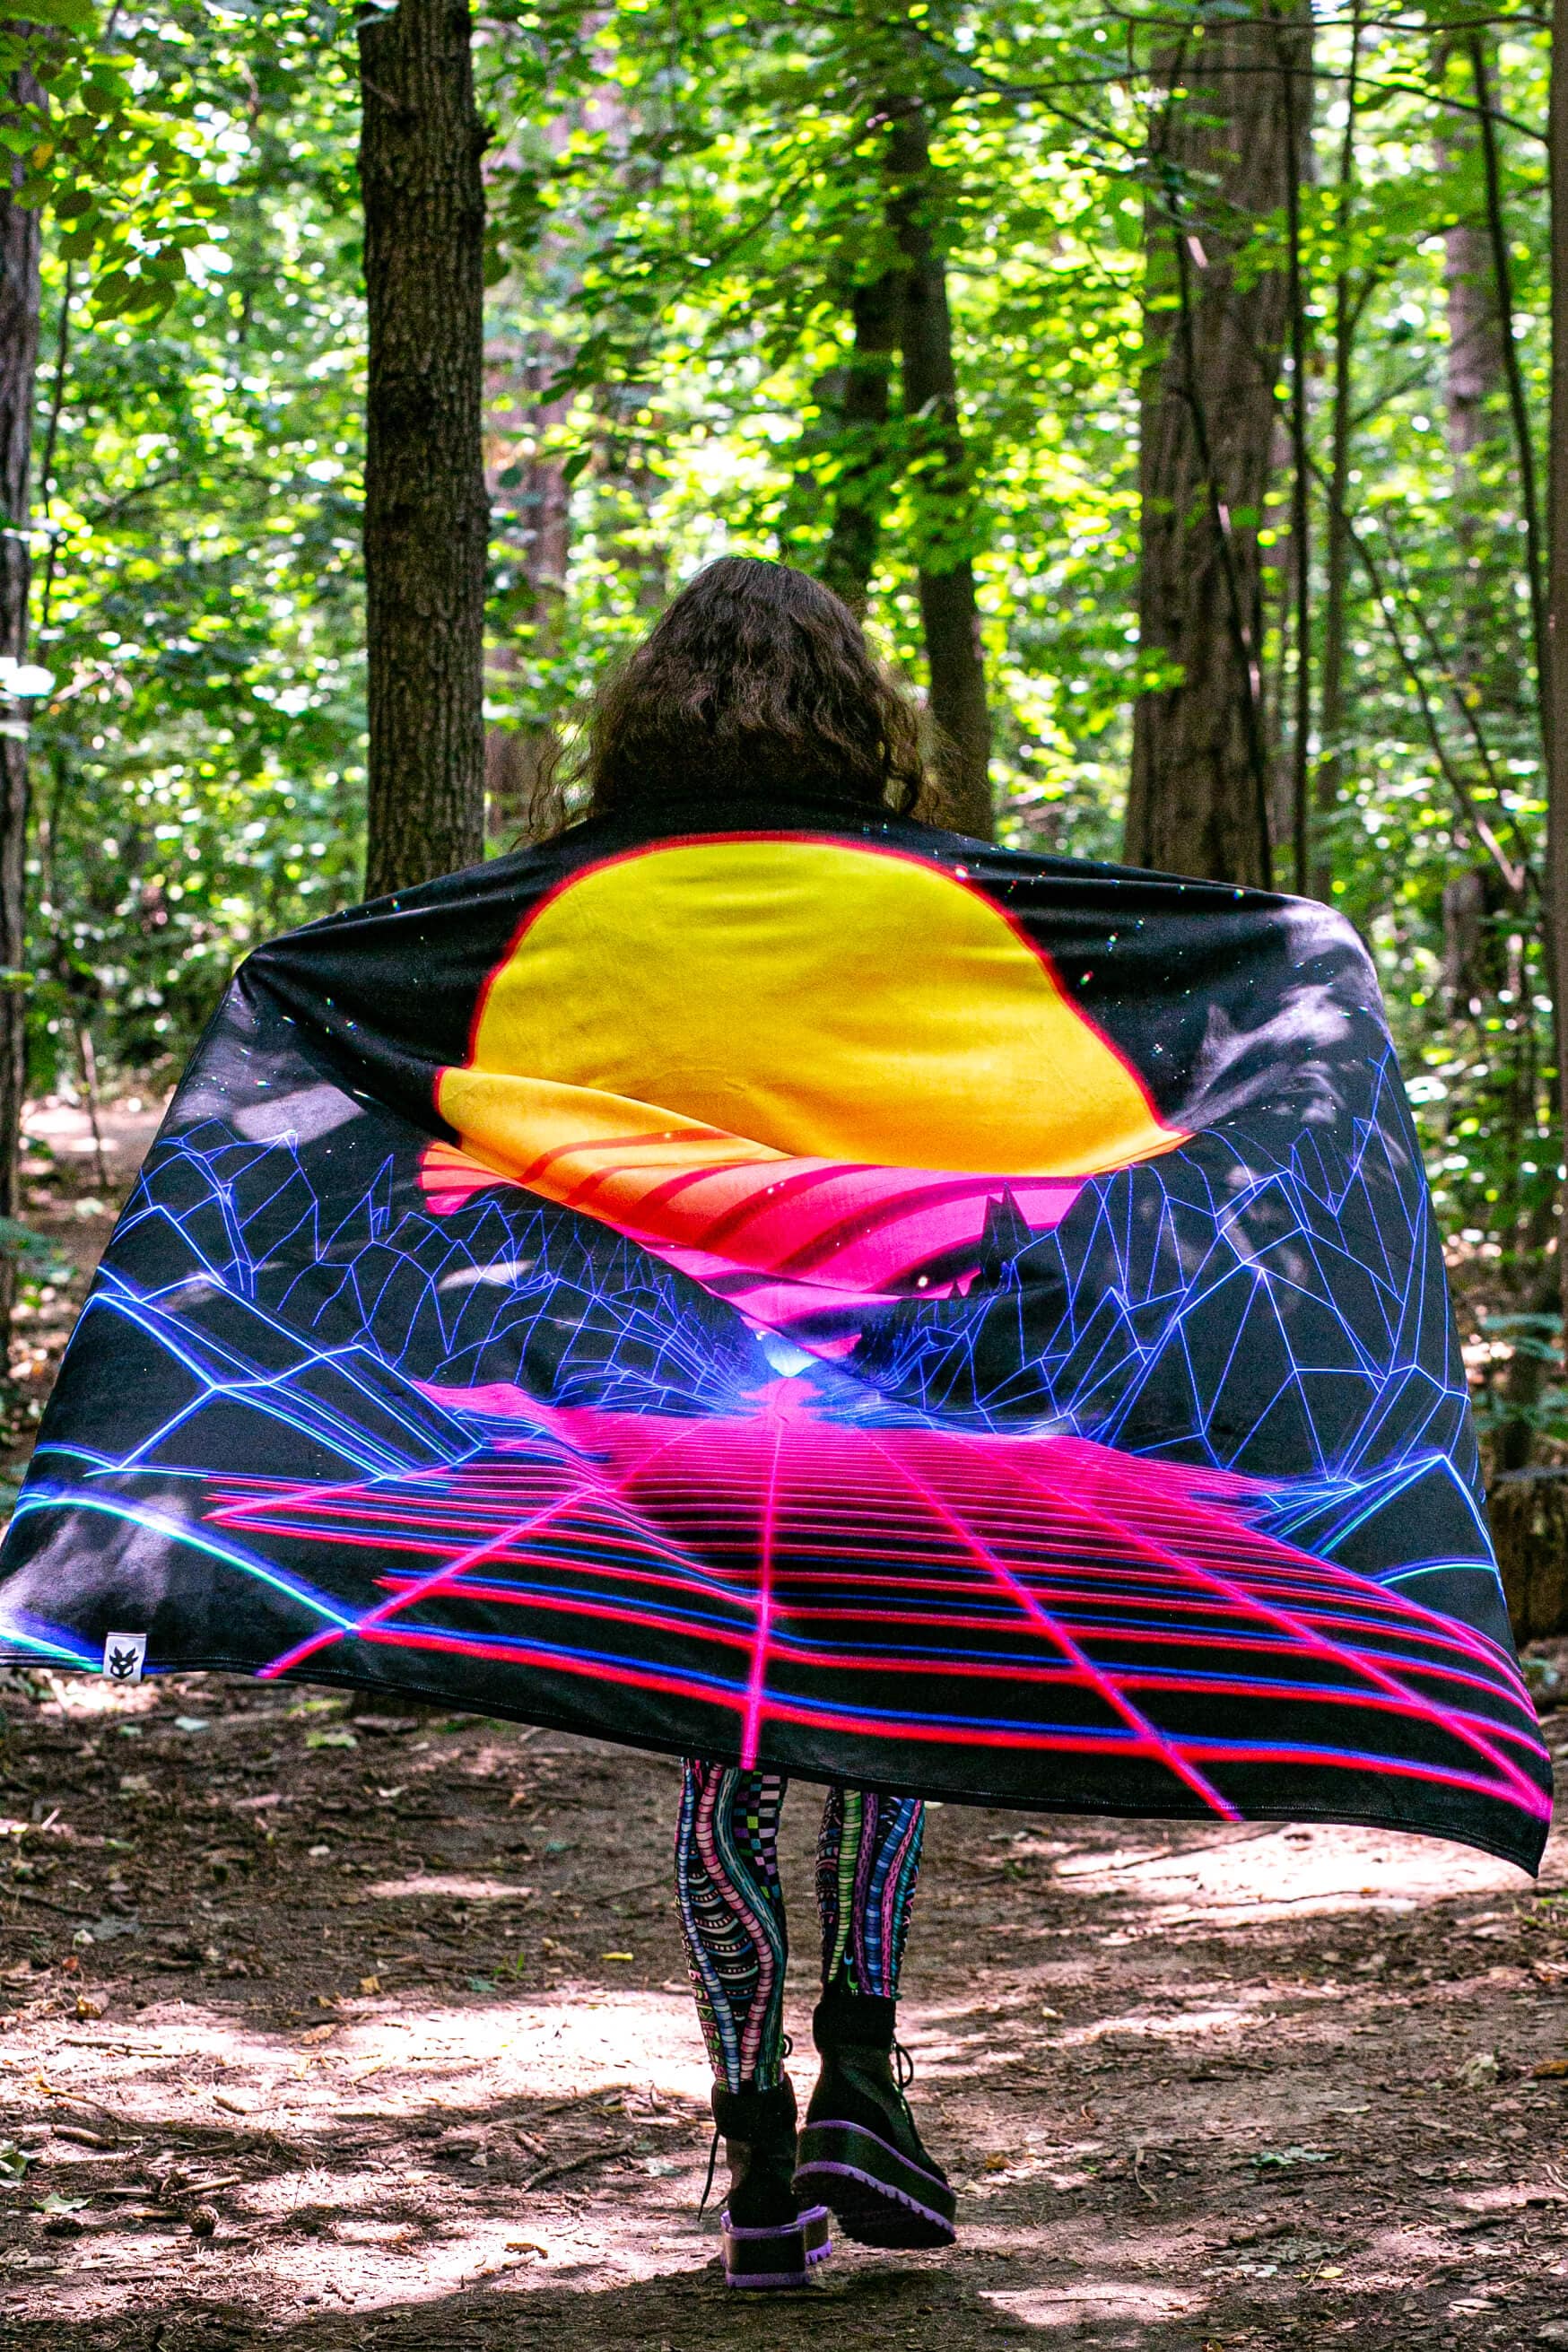 Synthwave Sunset XXL Towel